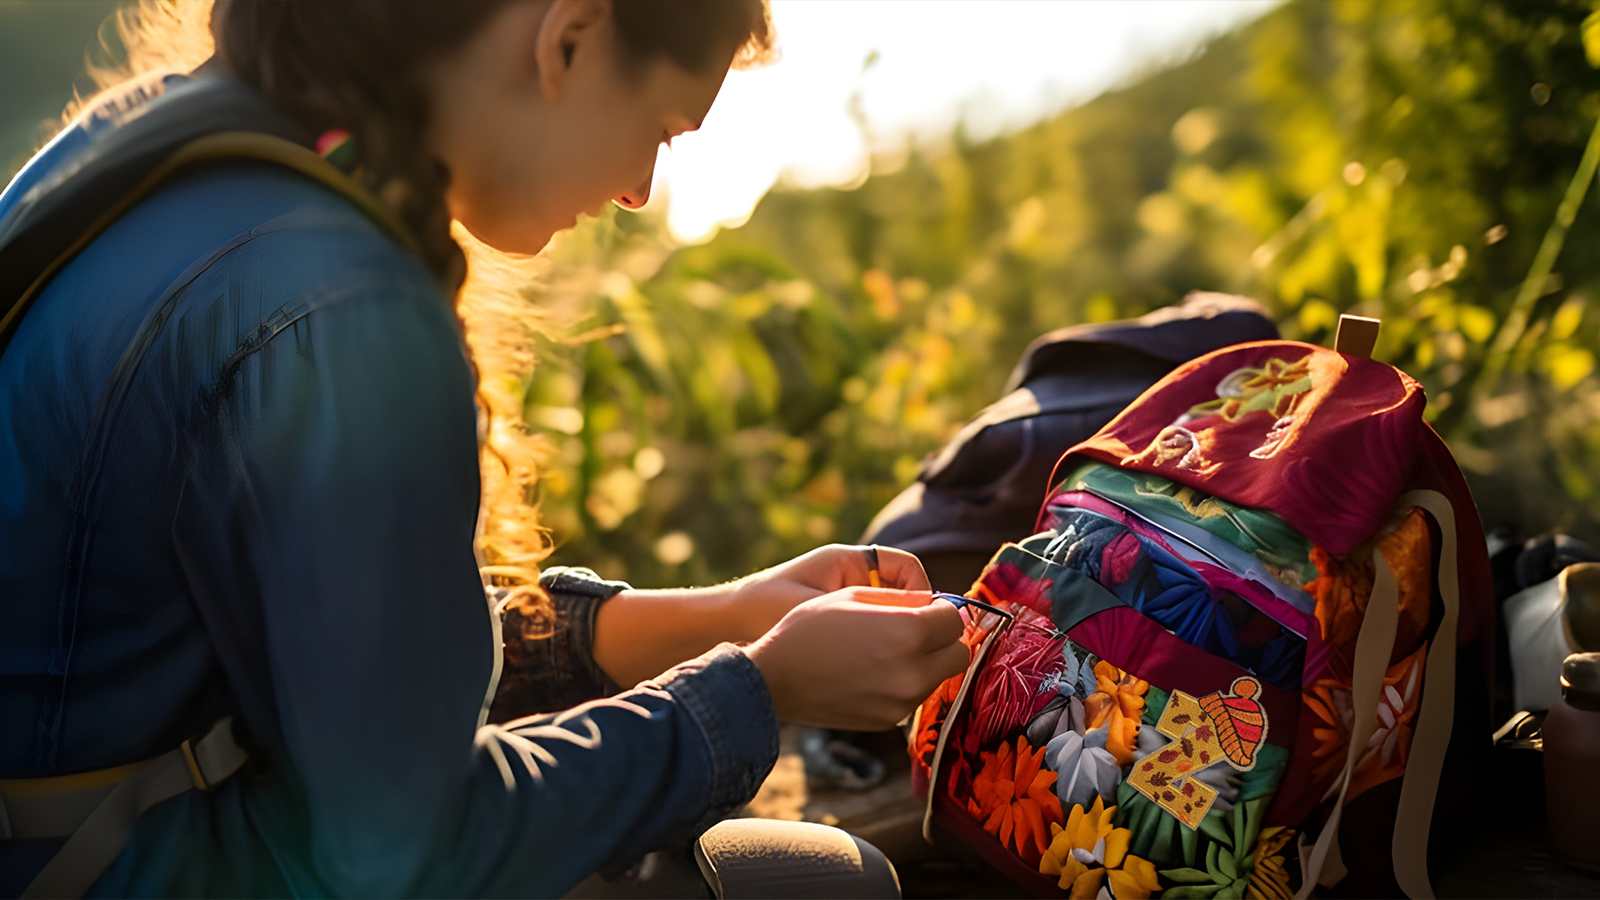 DIY tutorial - how to sew a patch on a backpack demonstrated by a young woman